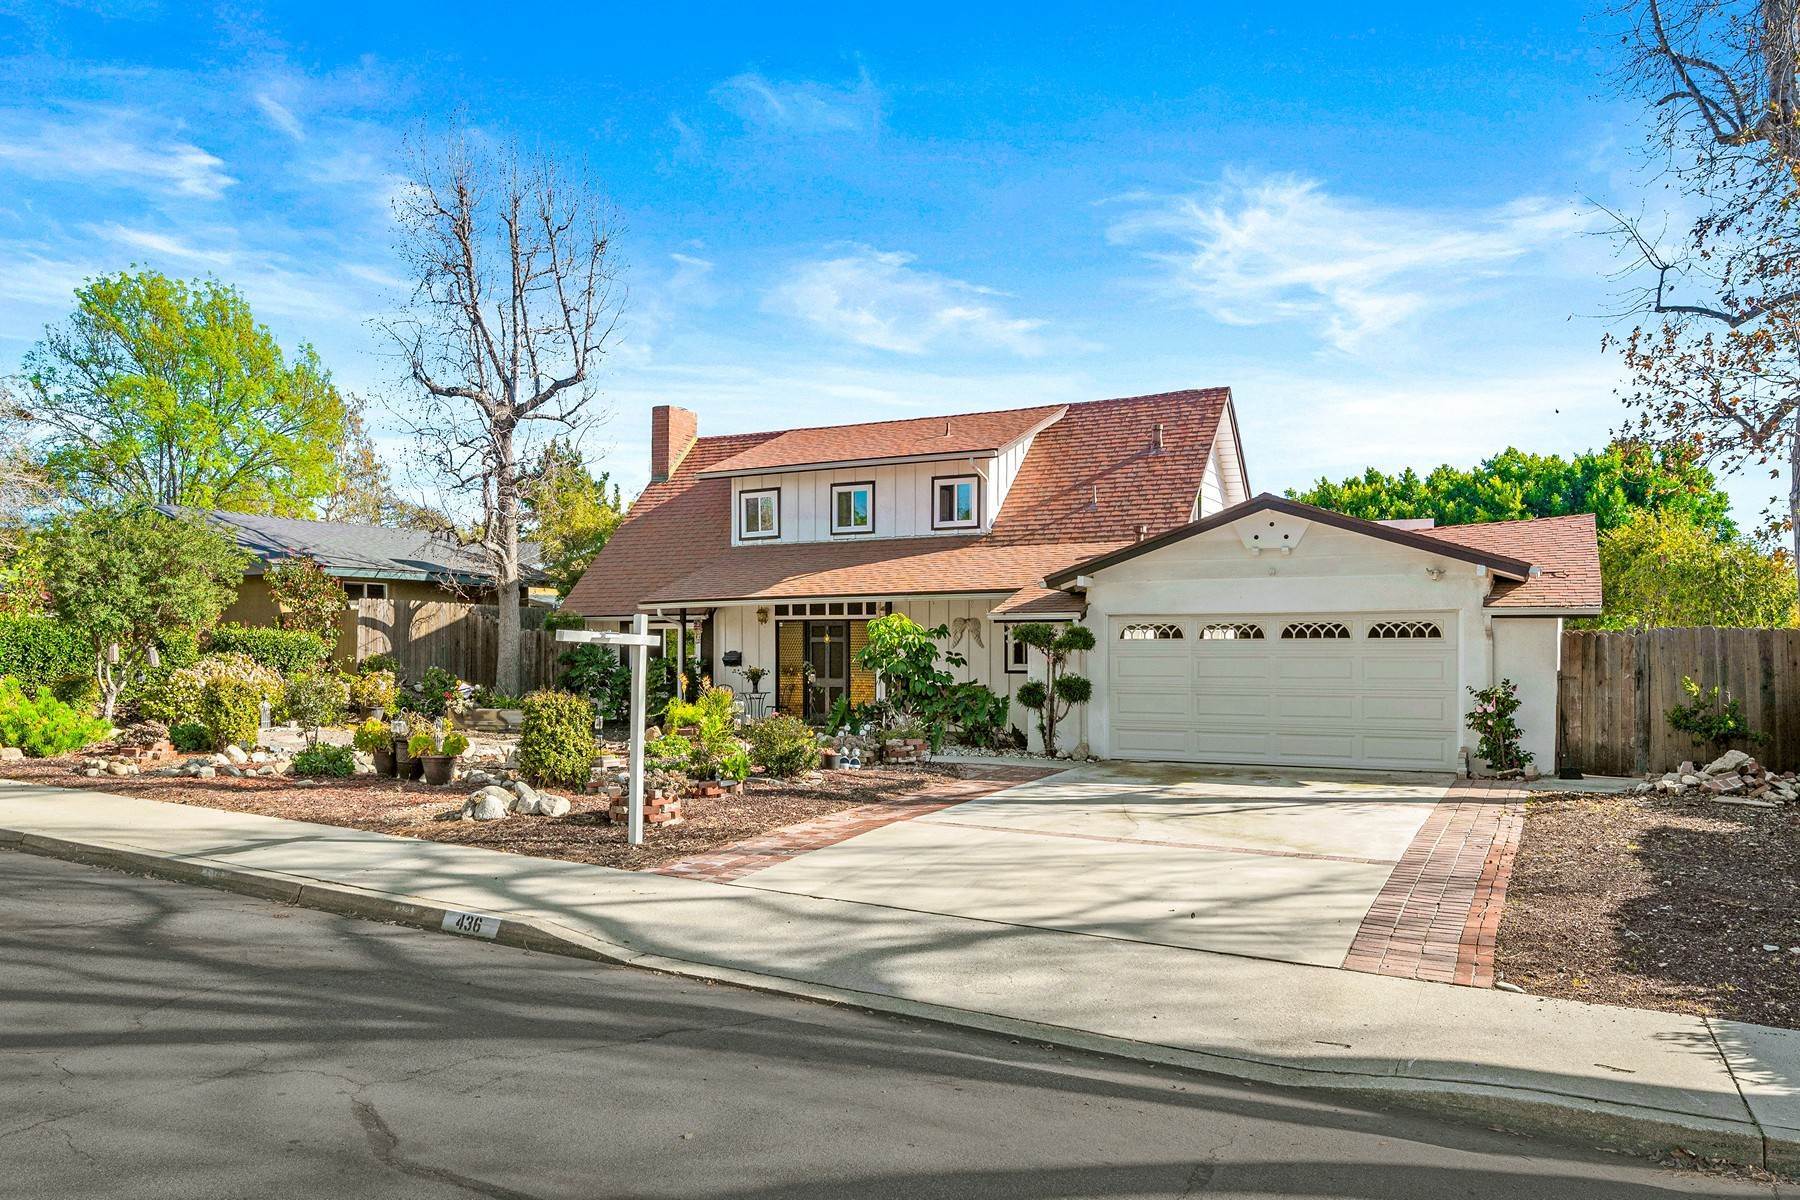 Single Family Homes for Sale at 436 Bowling Green Drive, Claremont, CA 91711 436 Bowling Green Drive Claremont, California 91711 United States